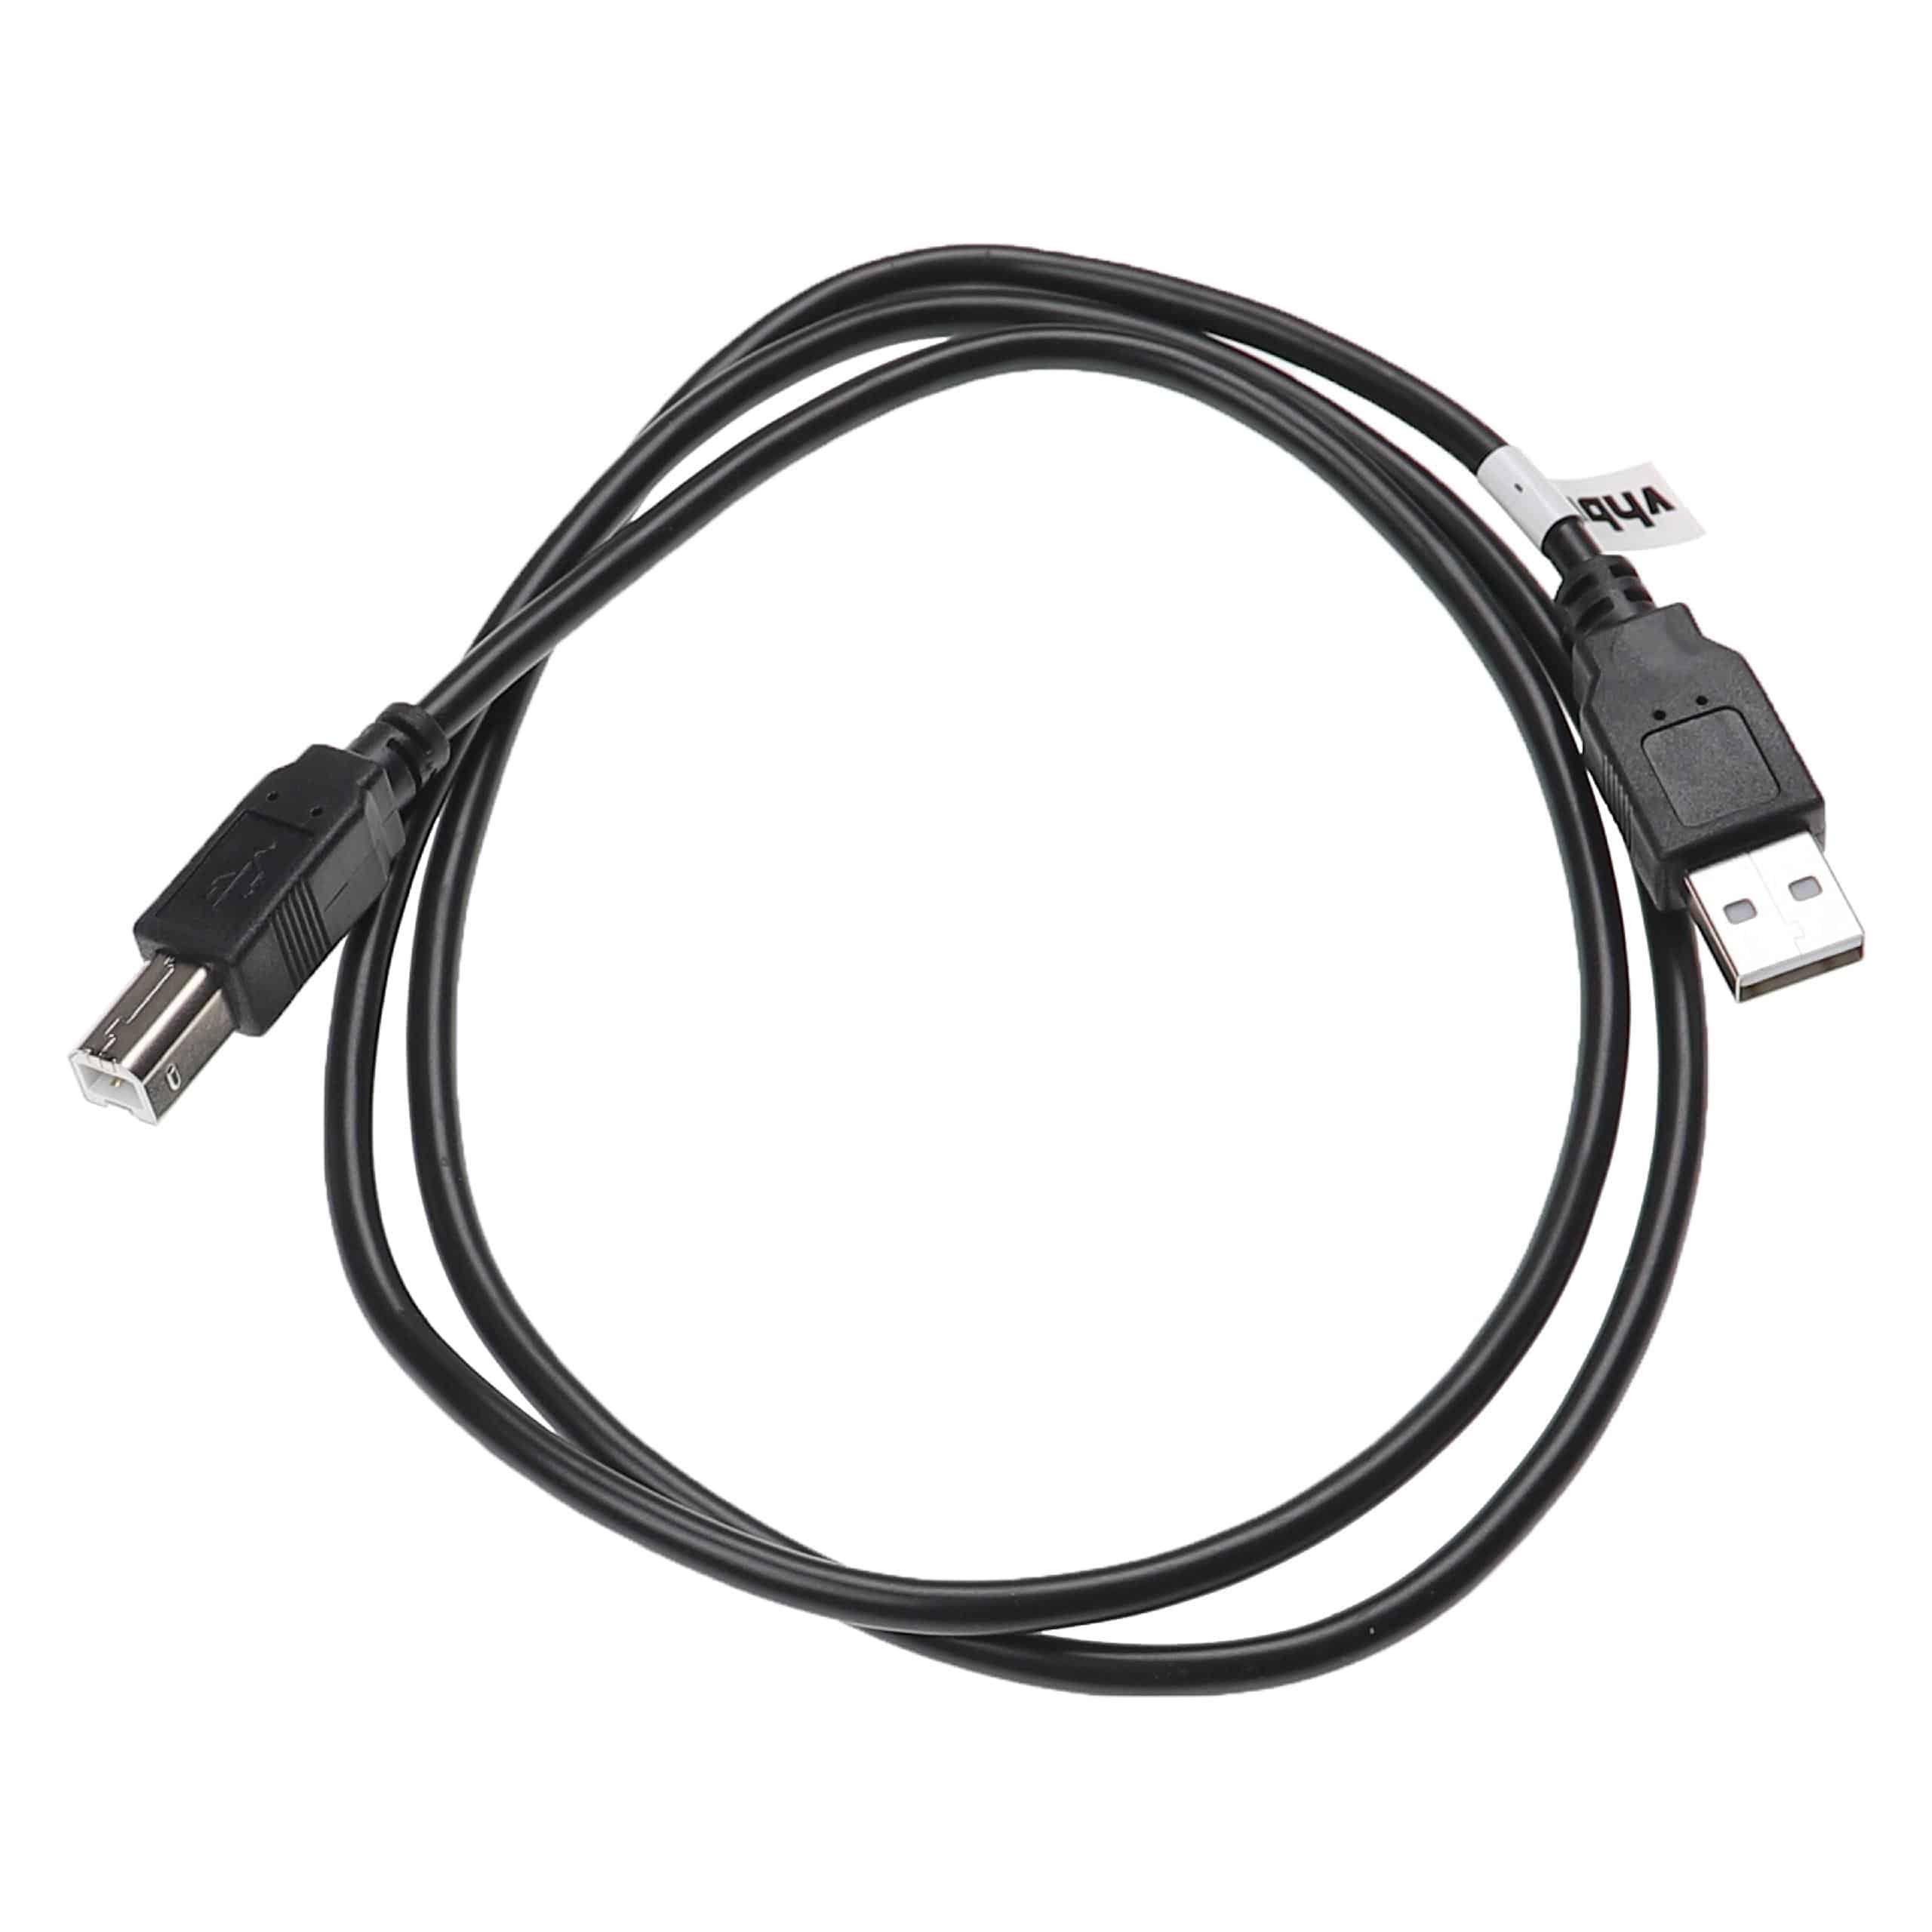 USB A to USB B Adapter Cable for Printer, Scanner, Fax Machine - USB Connection Cable